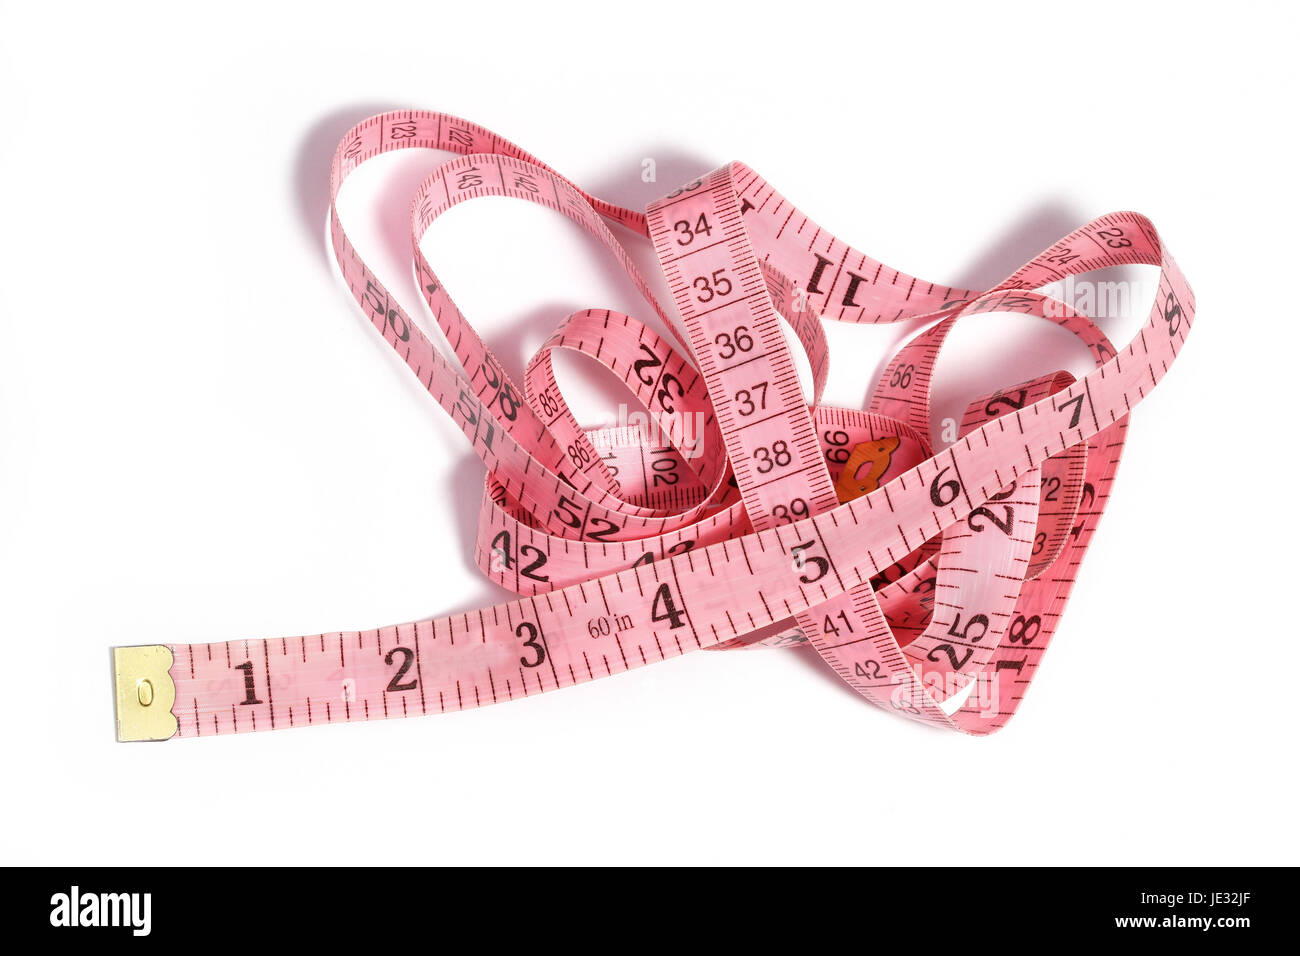 19,769 Measuring Tape Pink Images, Stock Photos, 3D objects, & Vectors